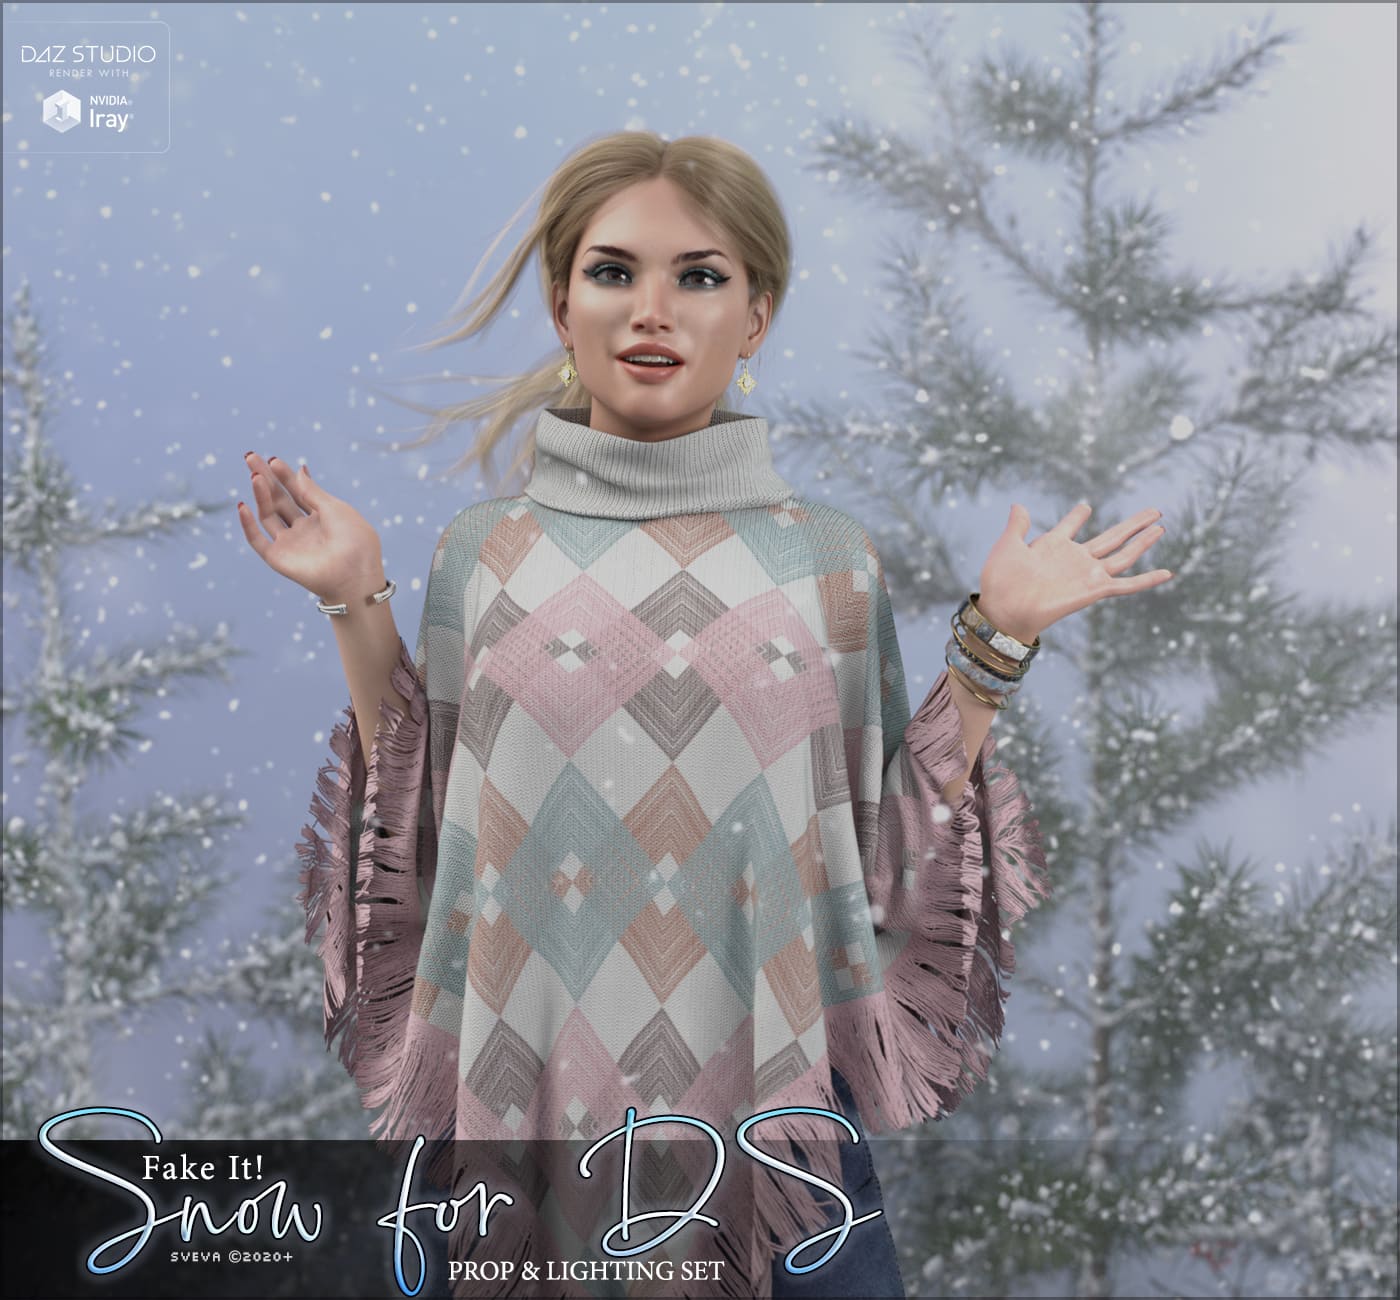 Fake It! Snow for DS_DAZ3D下载站